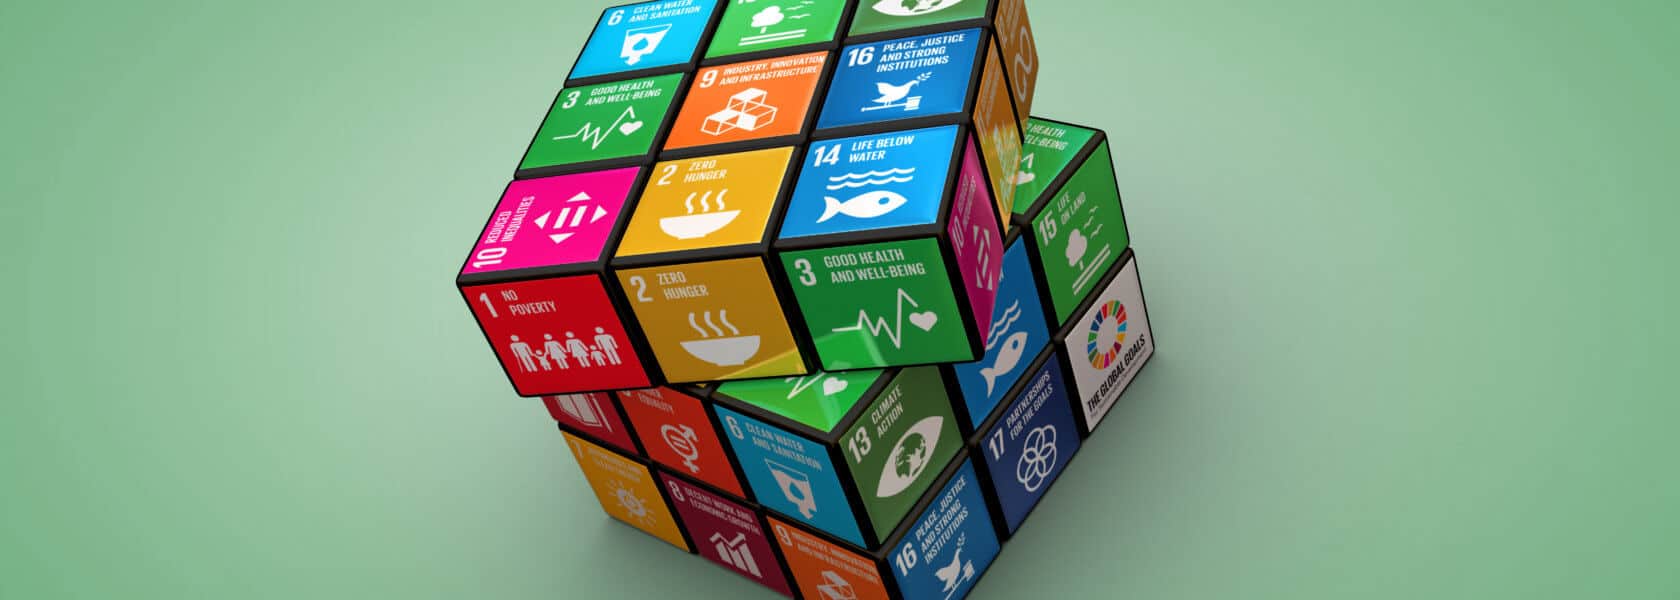 Lead2030 Challenges For SDG Oriented Projects